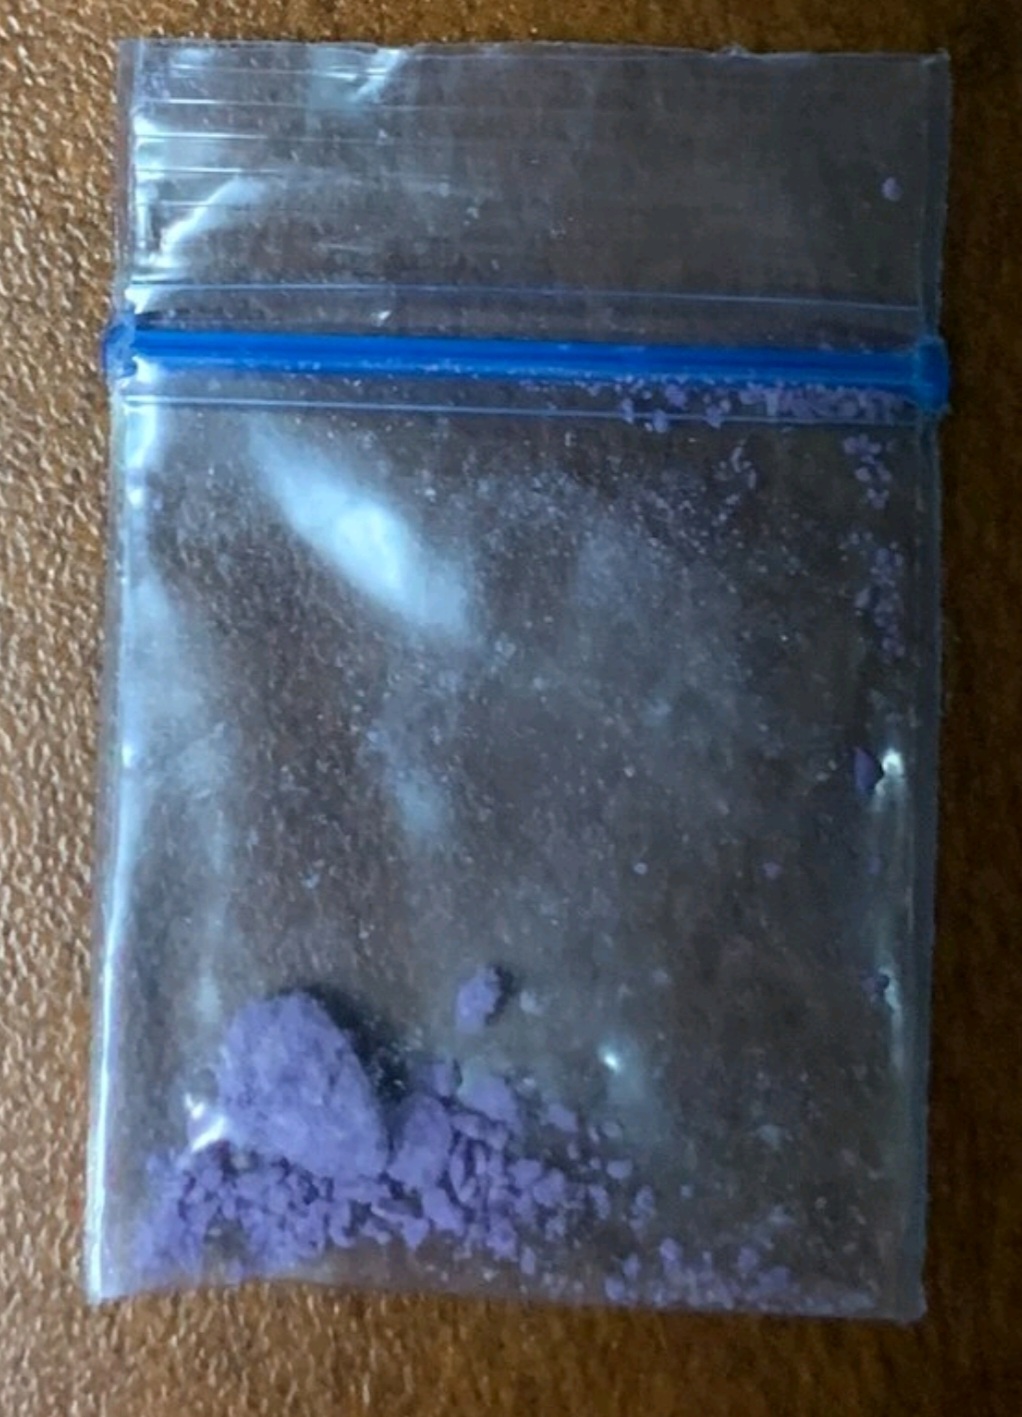 Purple chunky down with chalky texture contains fentanyl, benzos and possibly carfentanil